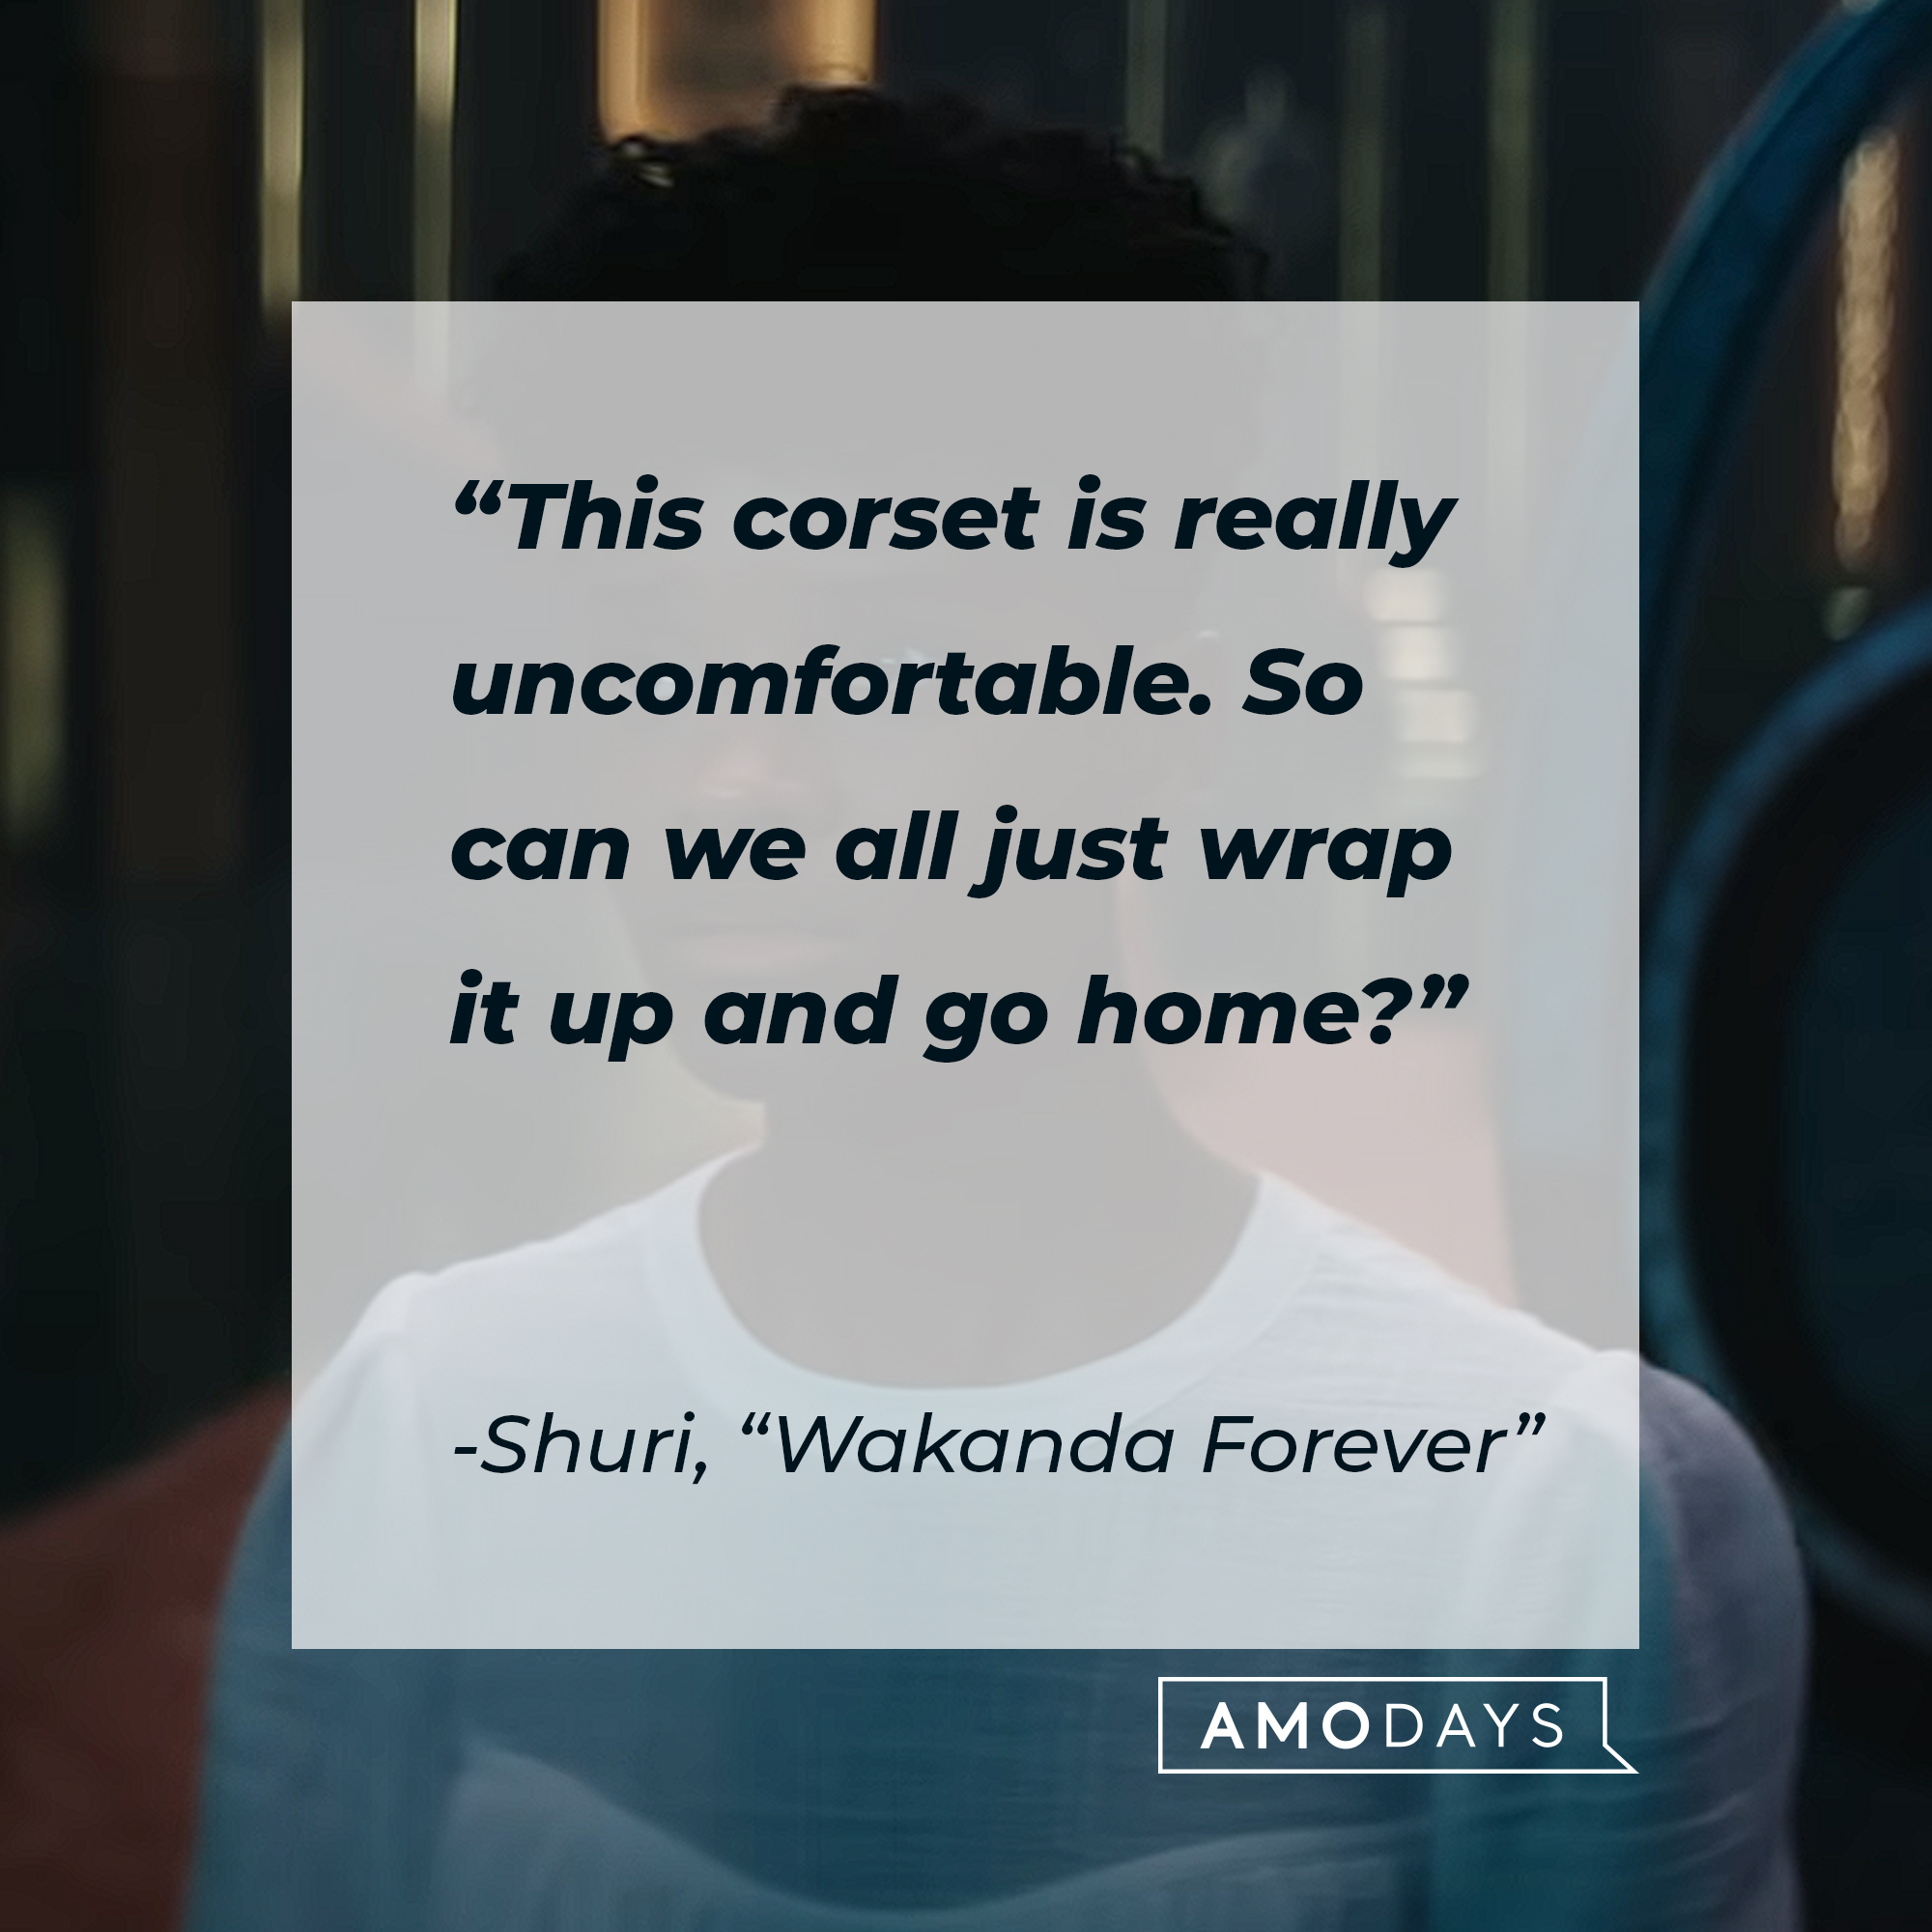 Shuri's quote from "Wakanda Forever:" "This corset is really uncomfortable. So can we all just wrap it up and go home?"  | Source: Youtube.com/marvel